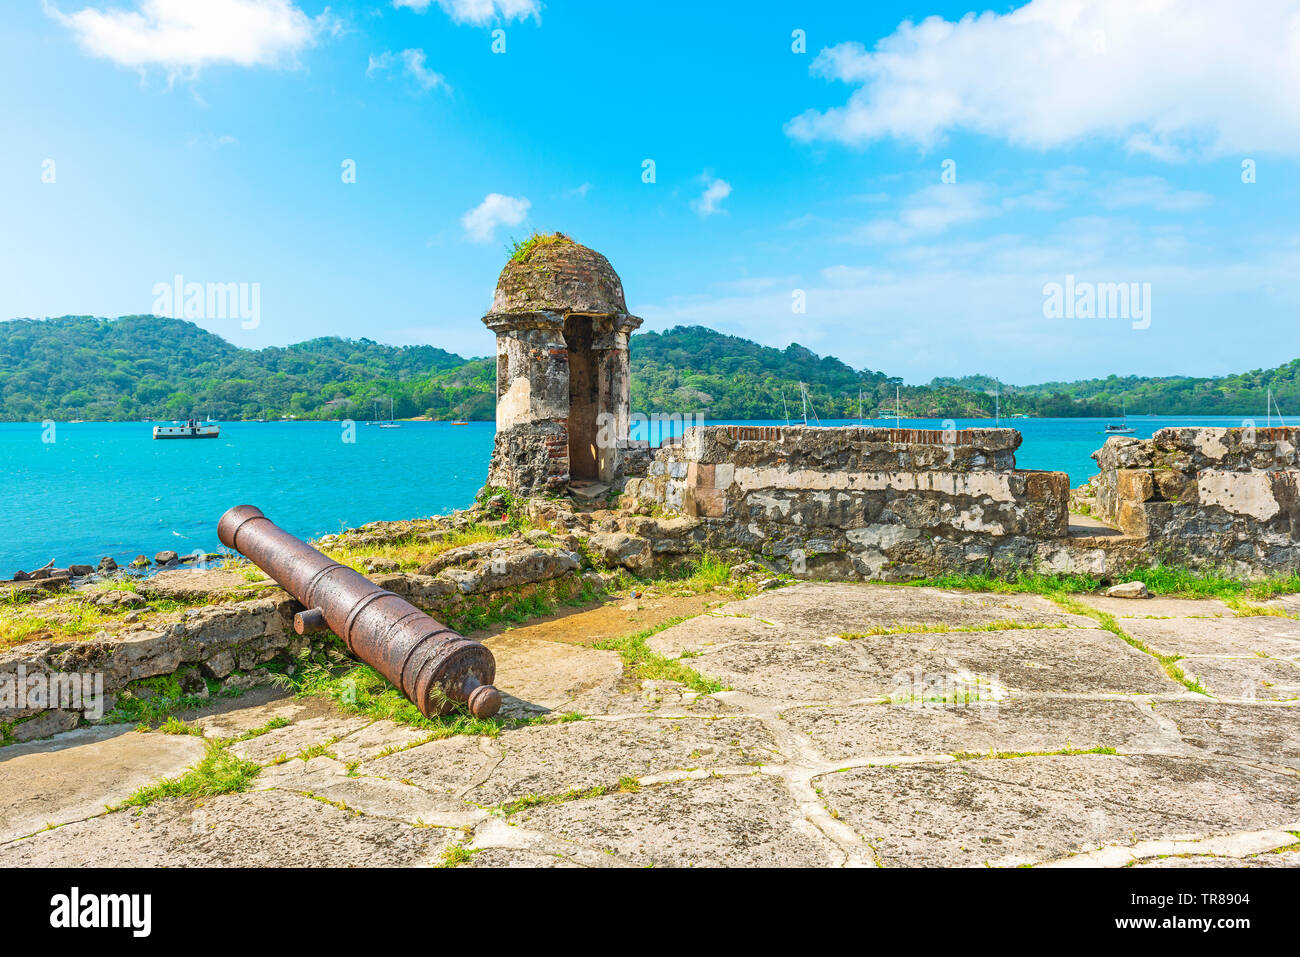 Ancient Spanish fortress with shooting tower and cannon by the Caribbean Sea to protect the custom from pirate attacks, Portobelo, Panama. Stock Photo